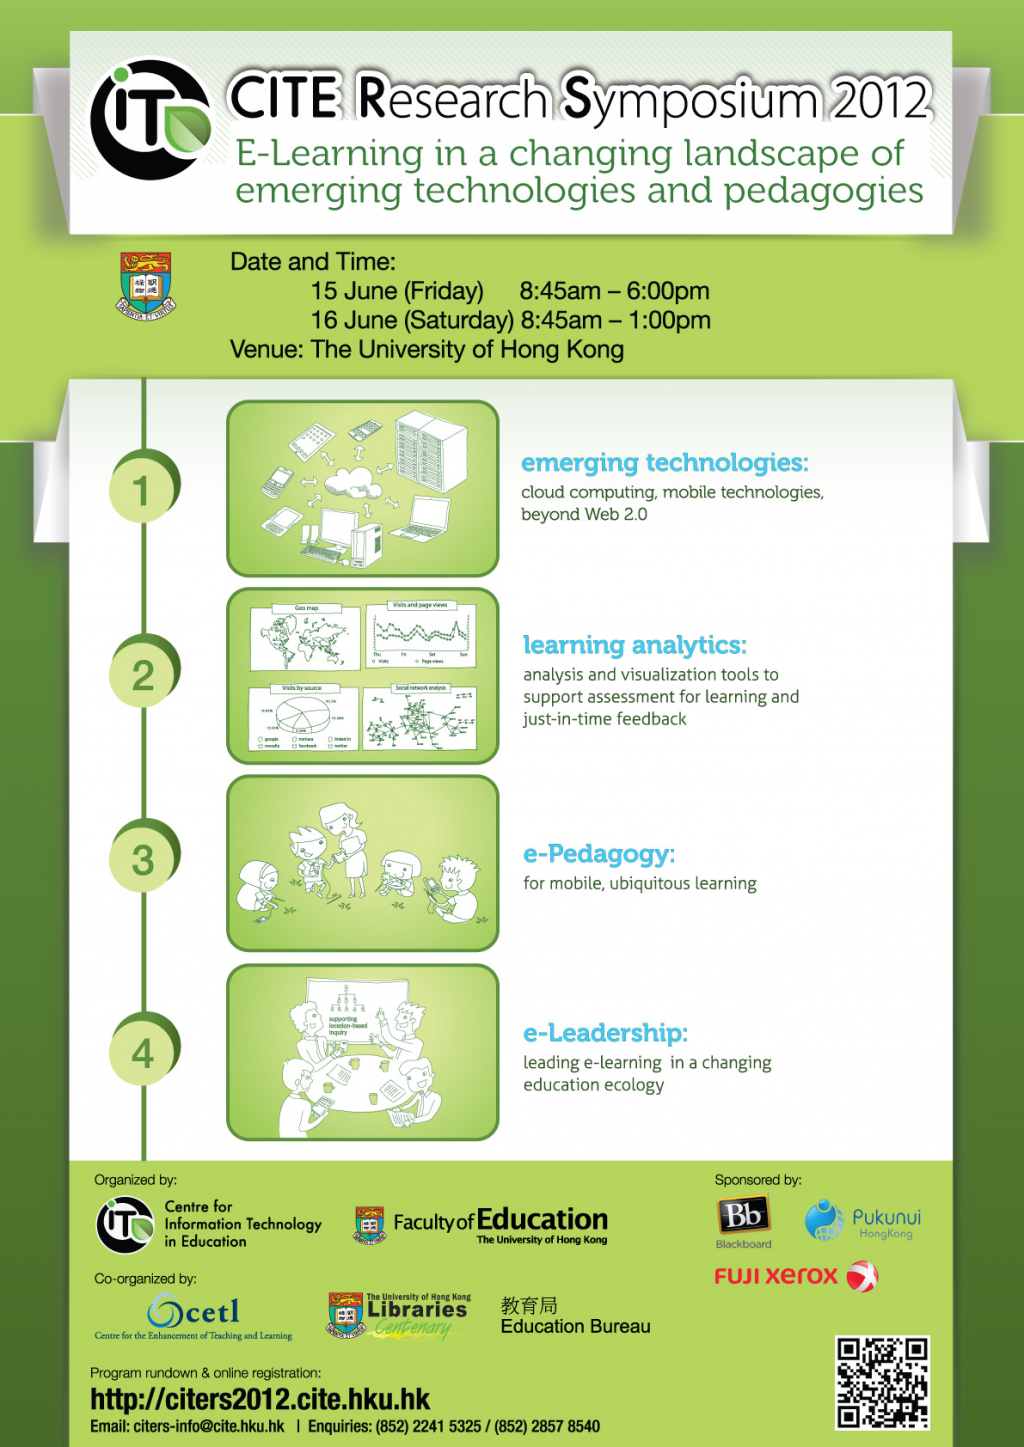 CITE Research Symposium 2012 ‘E-Learning in a changing landscape of emerging technologies and pedagogies’